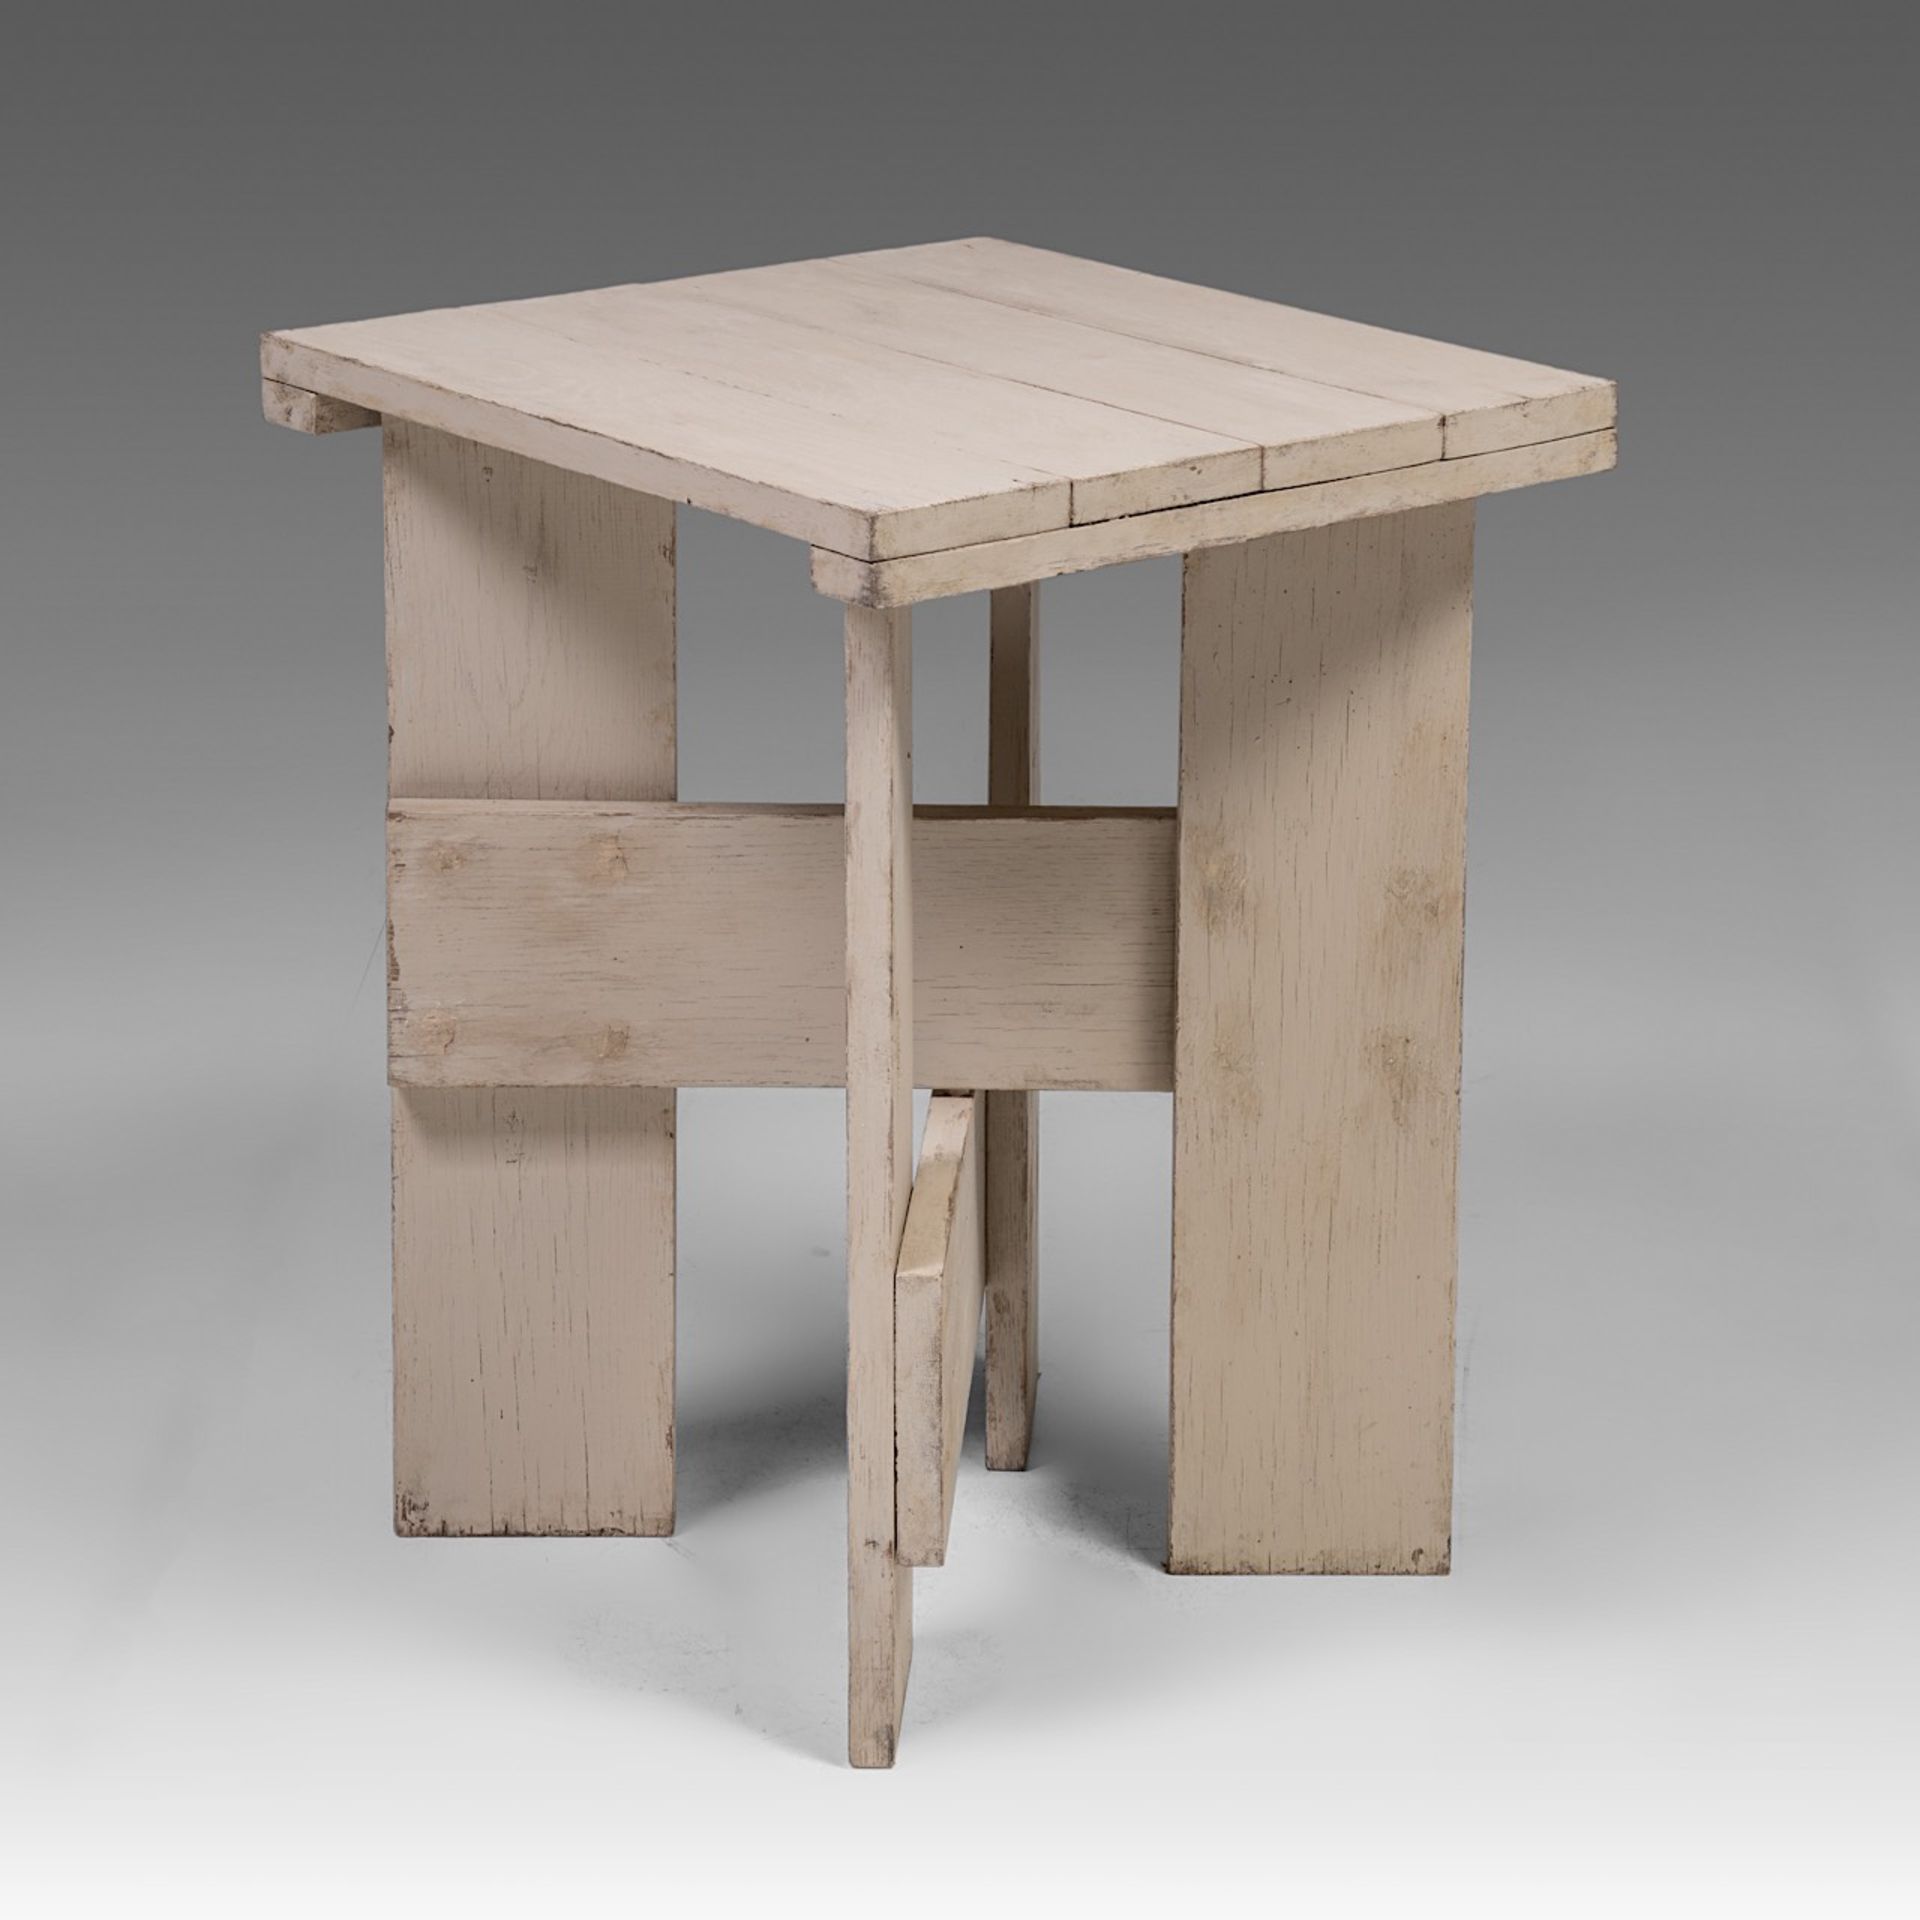 A decorative Low crate table after Gerrit Rietveld, H 63 - W 49 - D 47 cm